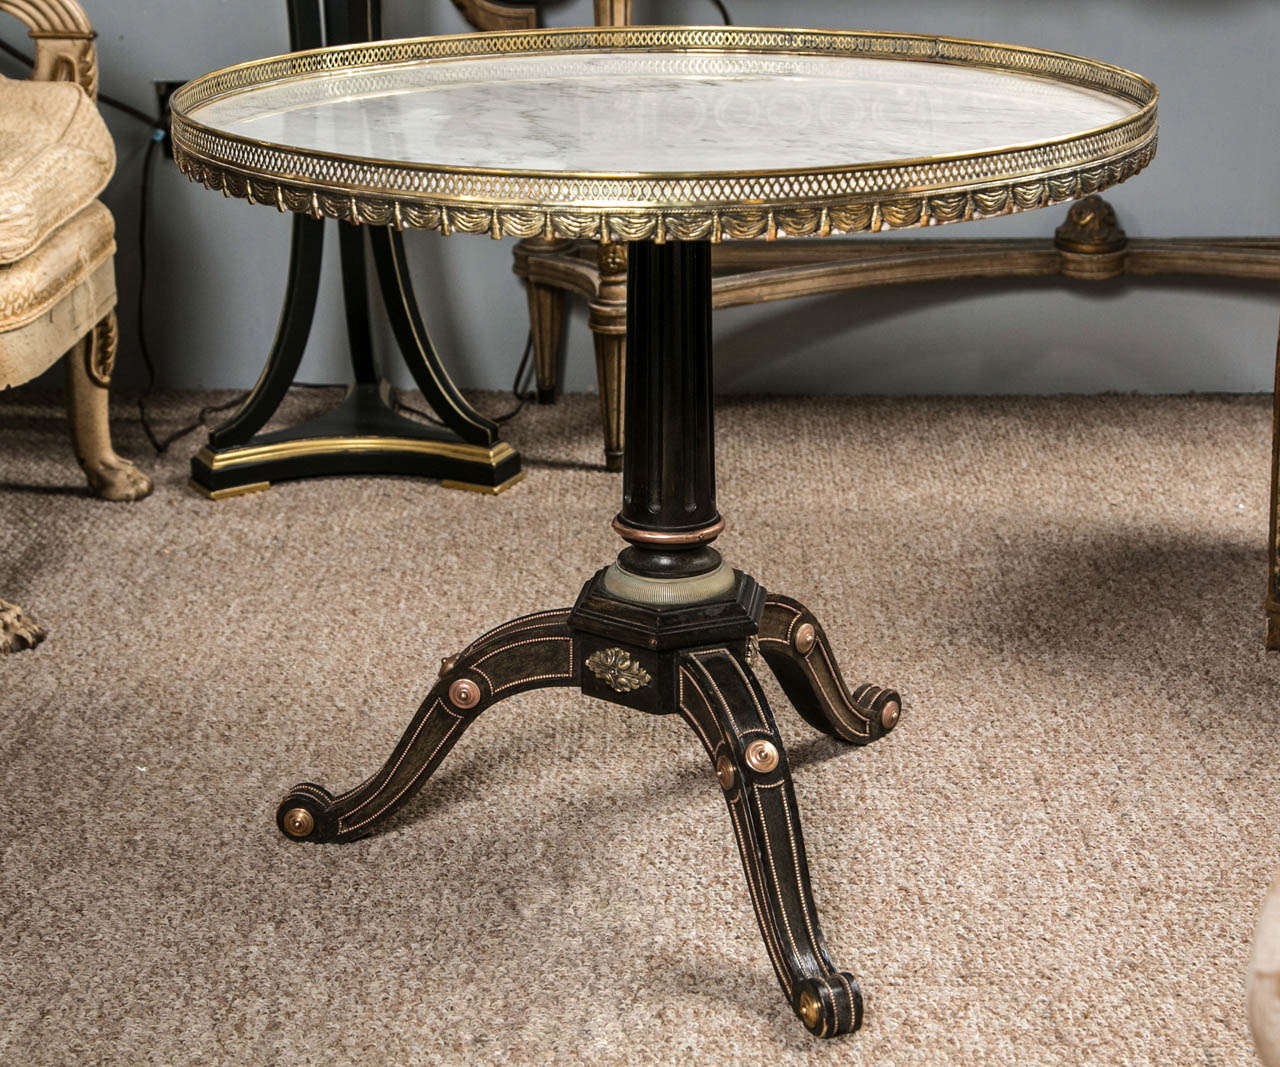 A very fine and rare Russian neoclassical style centre table by Jansen. This table with ebonized woods is finely casted in bronze mounts sitting on a tri-pod base having all-over bronze mounts leading to a central tapering support. The white and